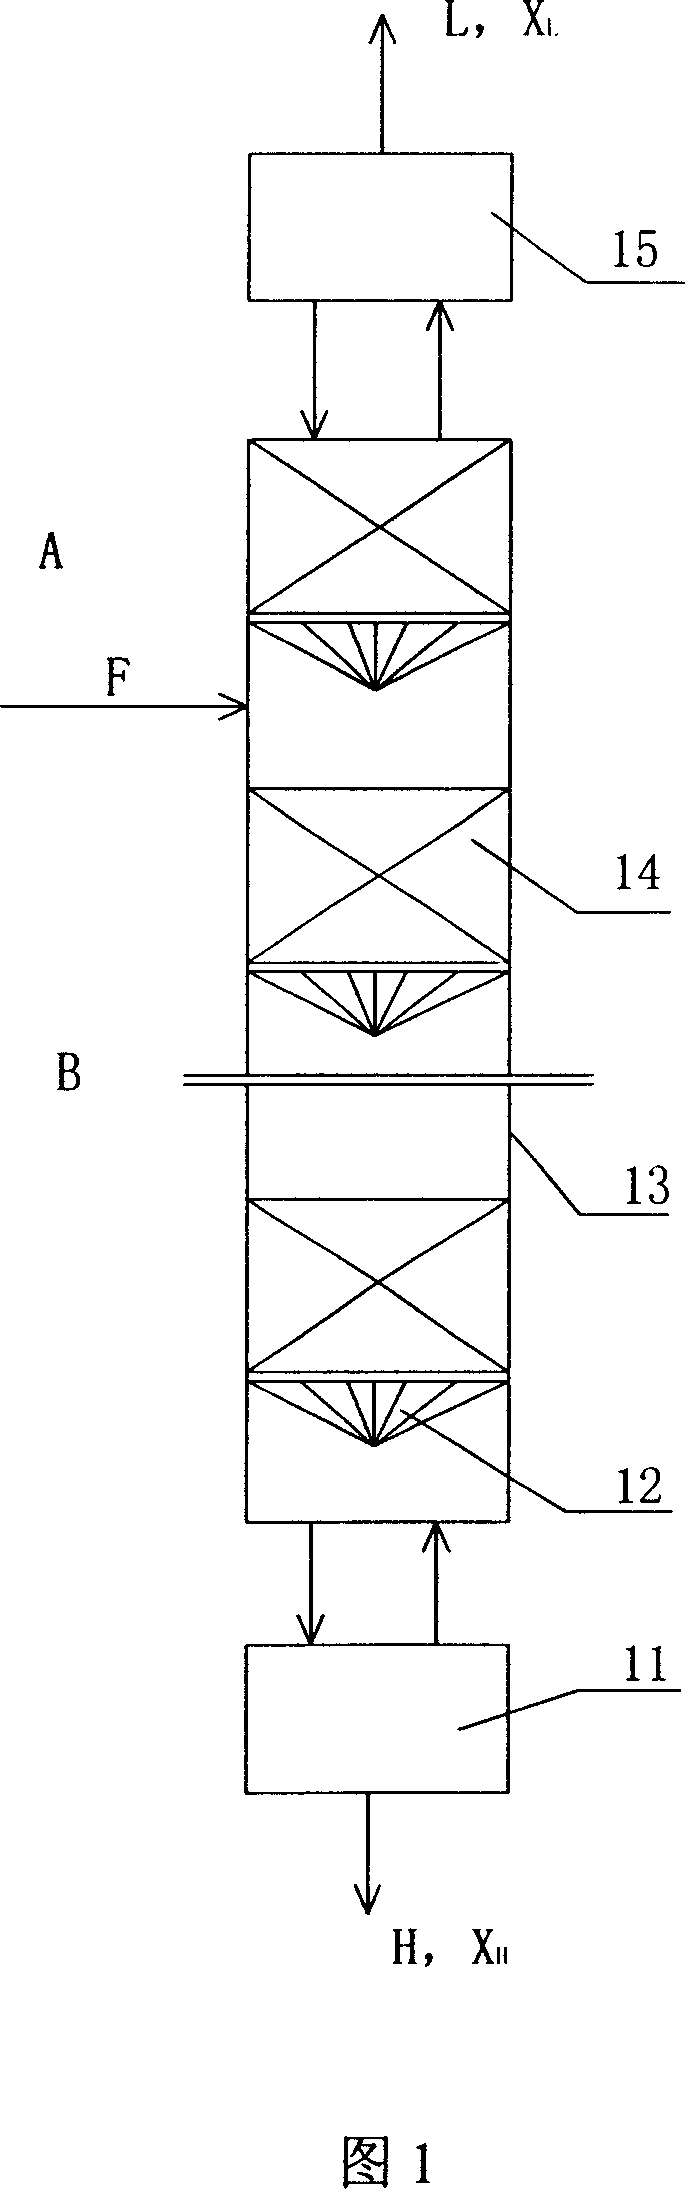 Hypothermia distillation device and method for separating stable isotopes